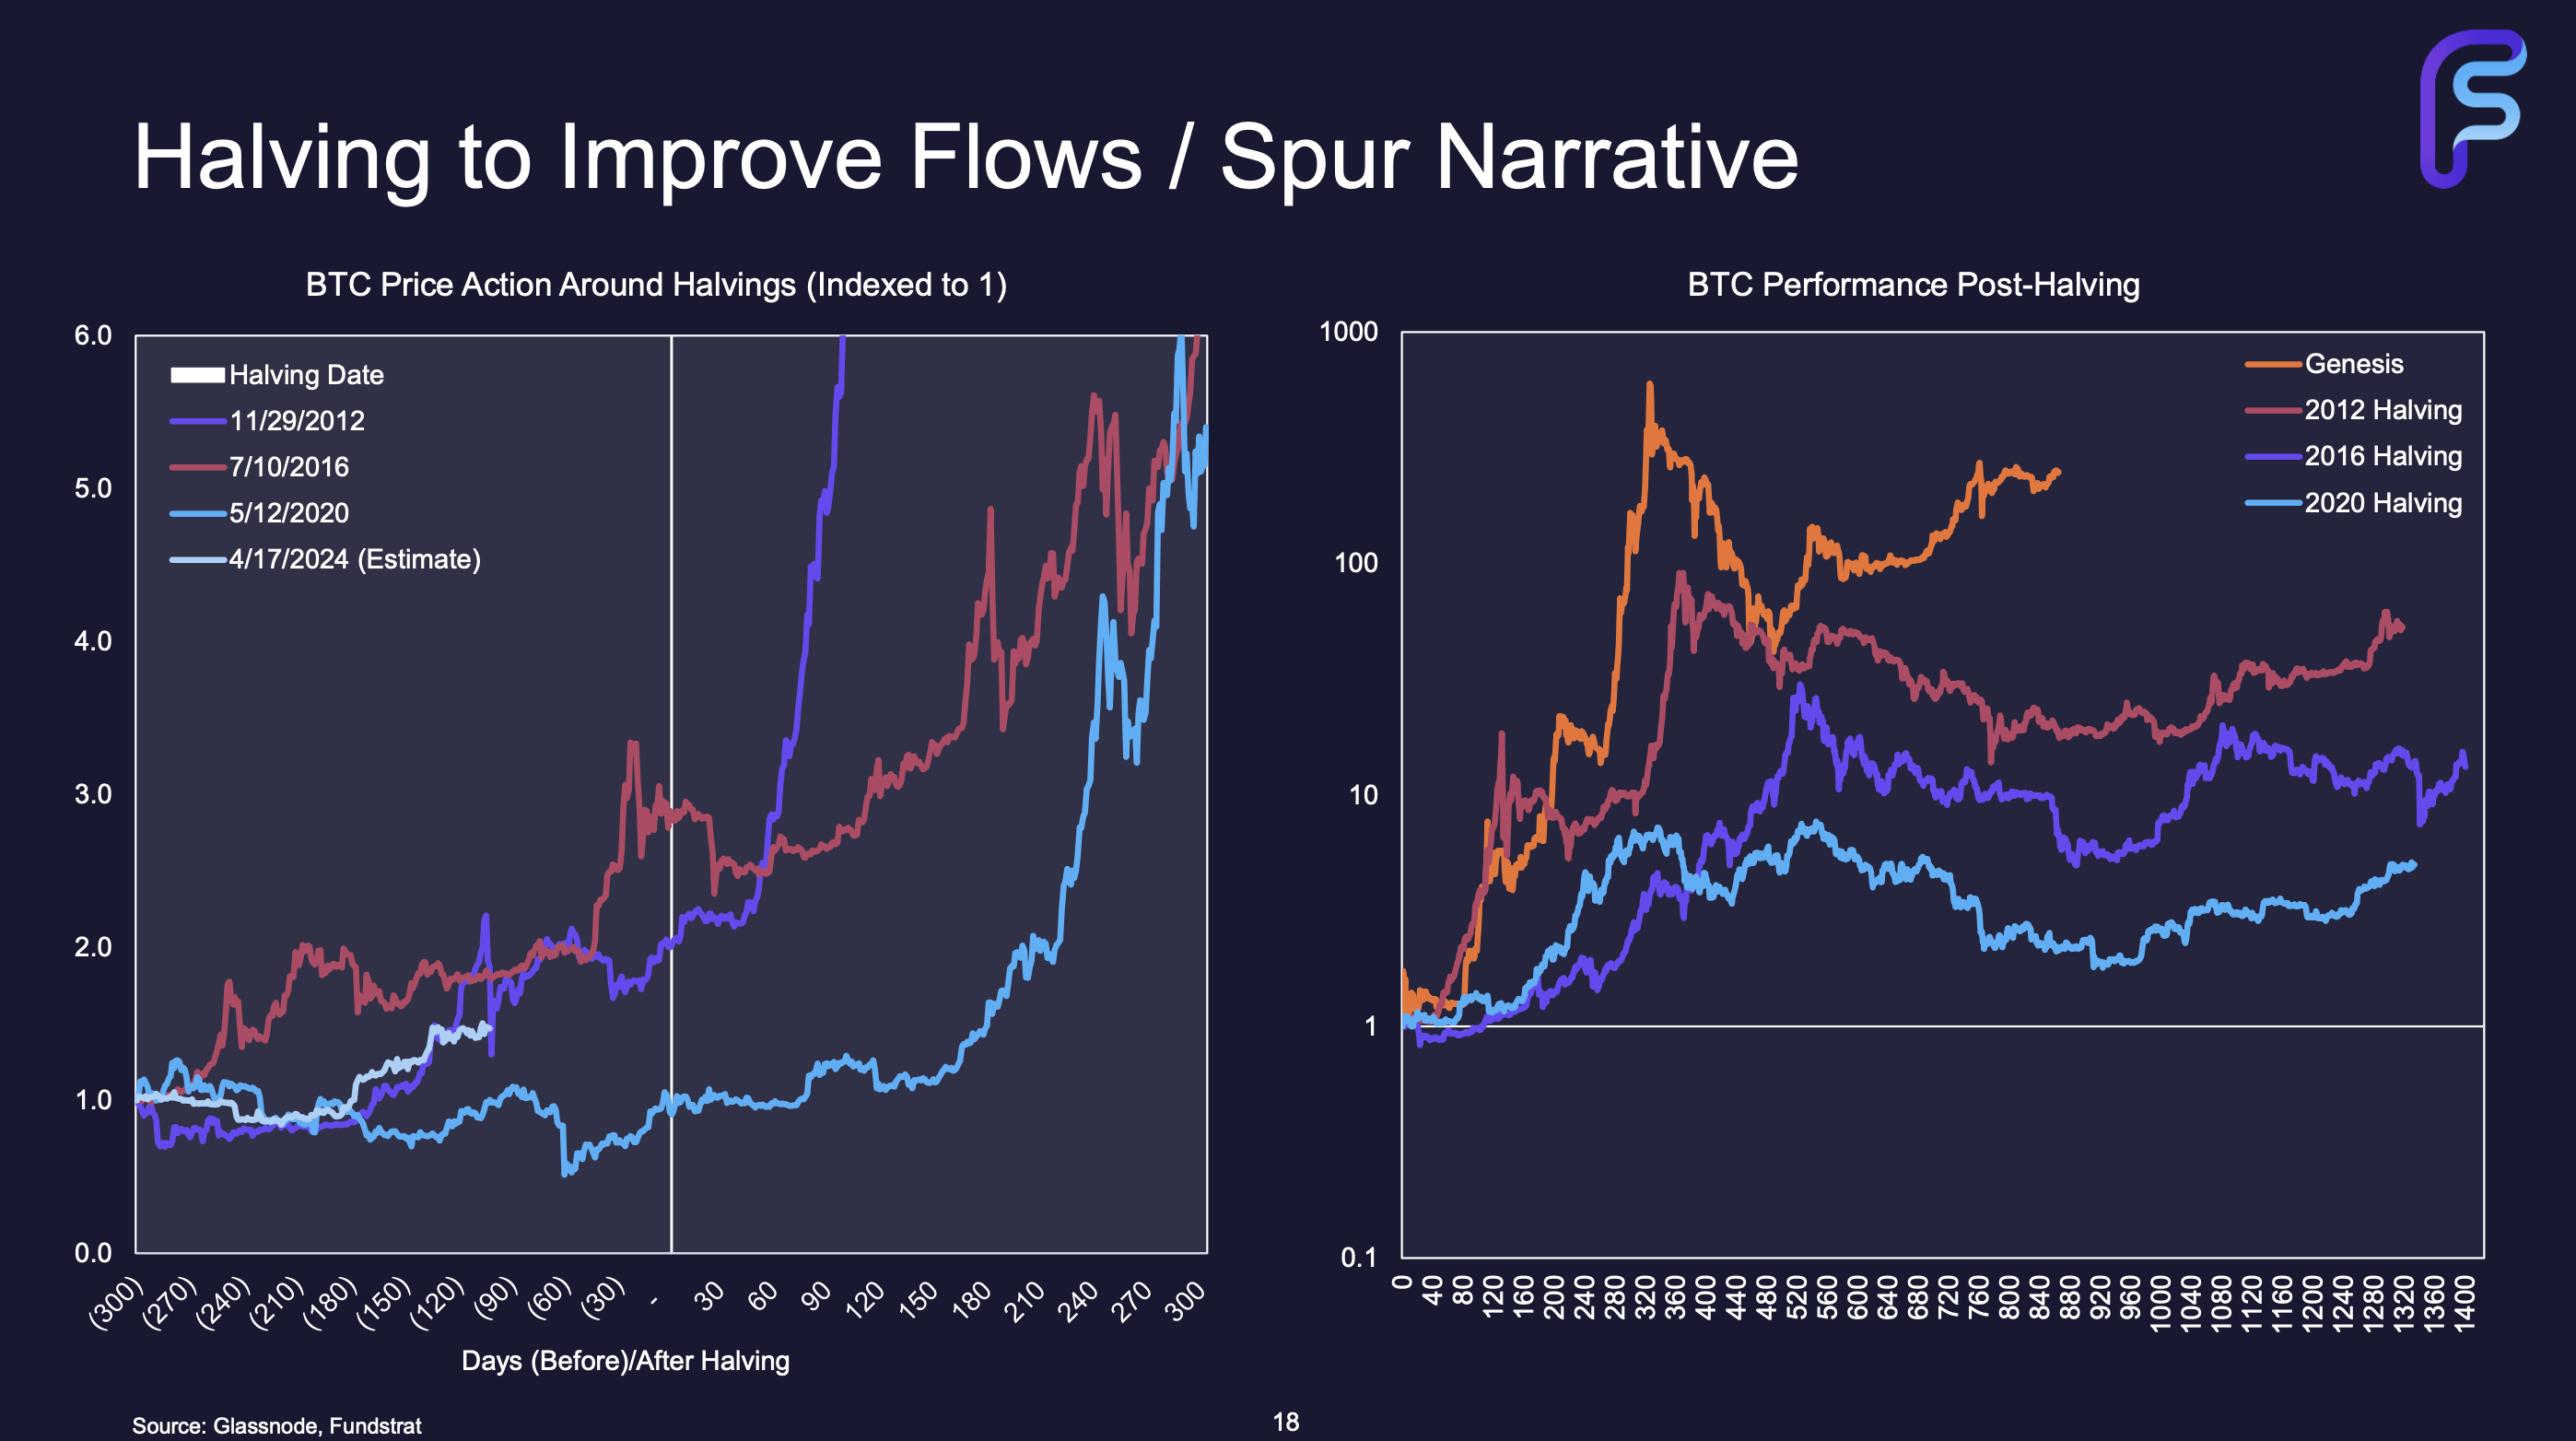 Historically, the halving is a strong catalyst for price, though each cycle has been less powerful. (Source: Fundstrat)